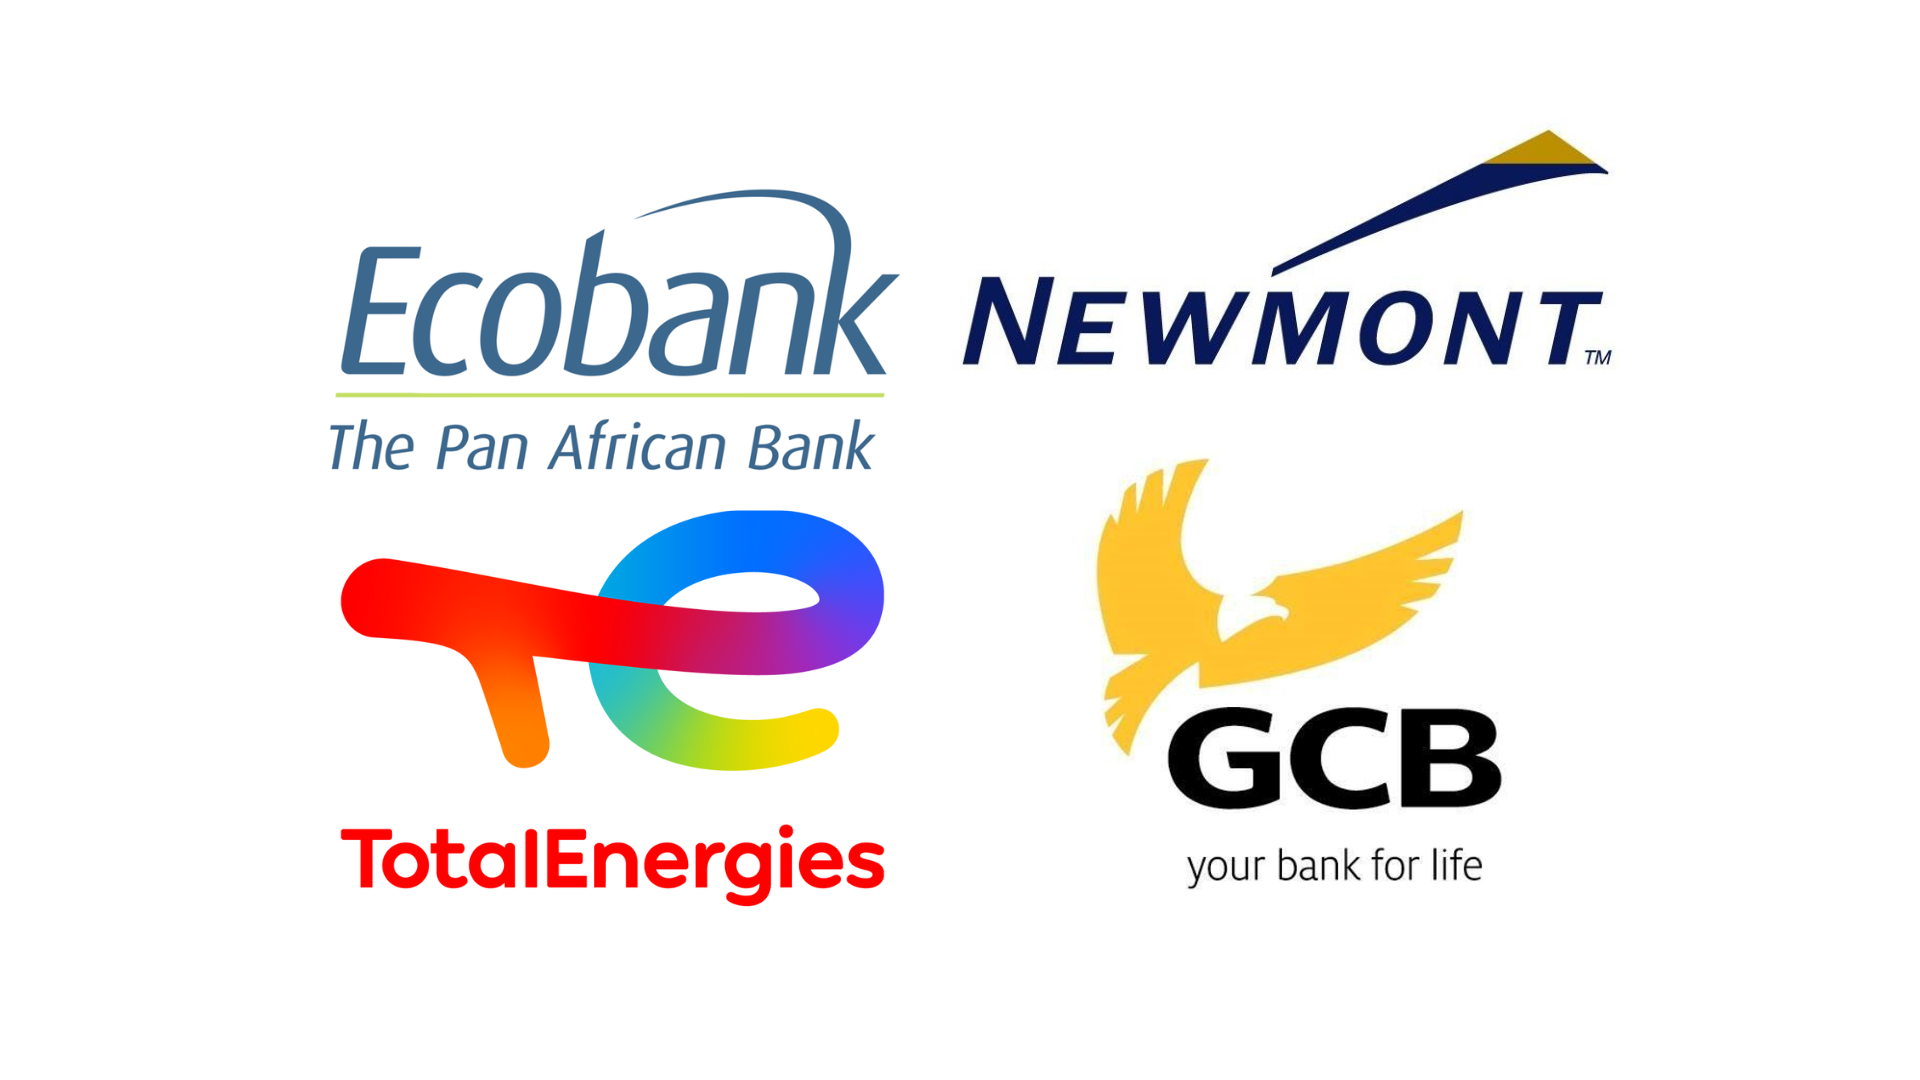 Top 10 richest companies in Ghana 2022: List and details